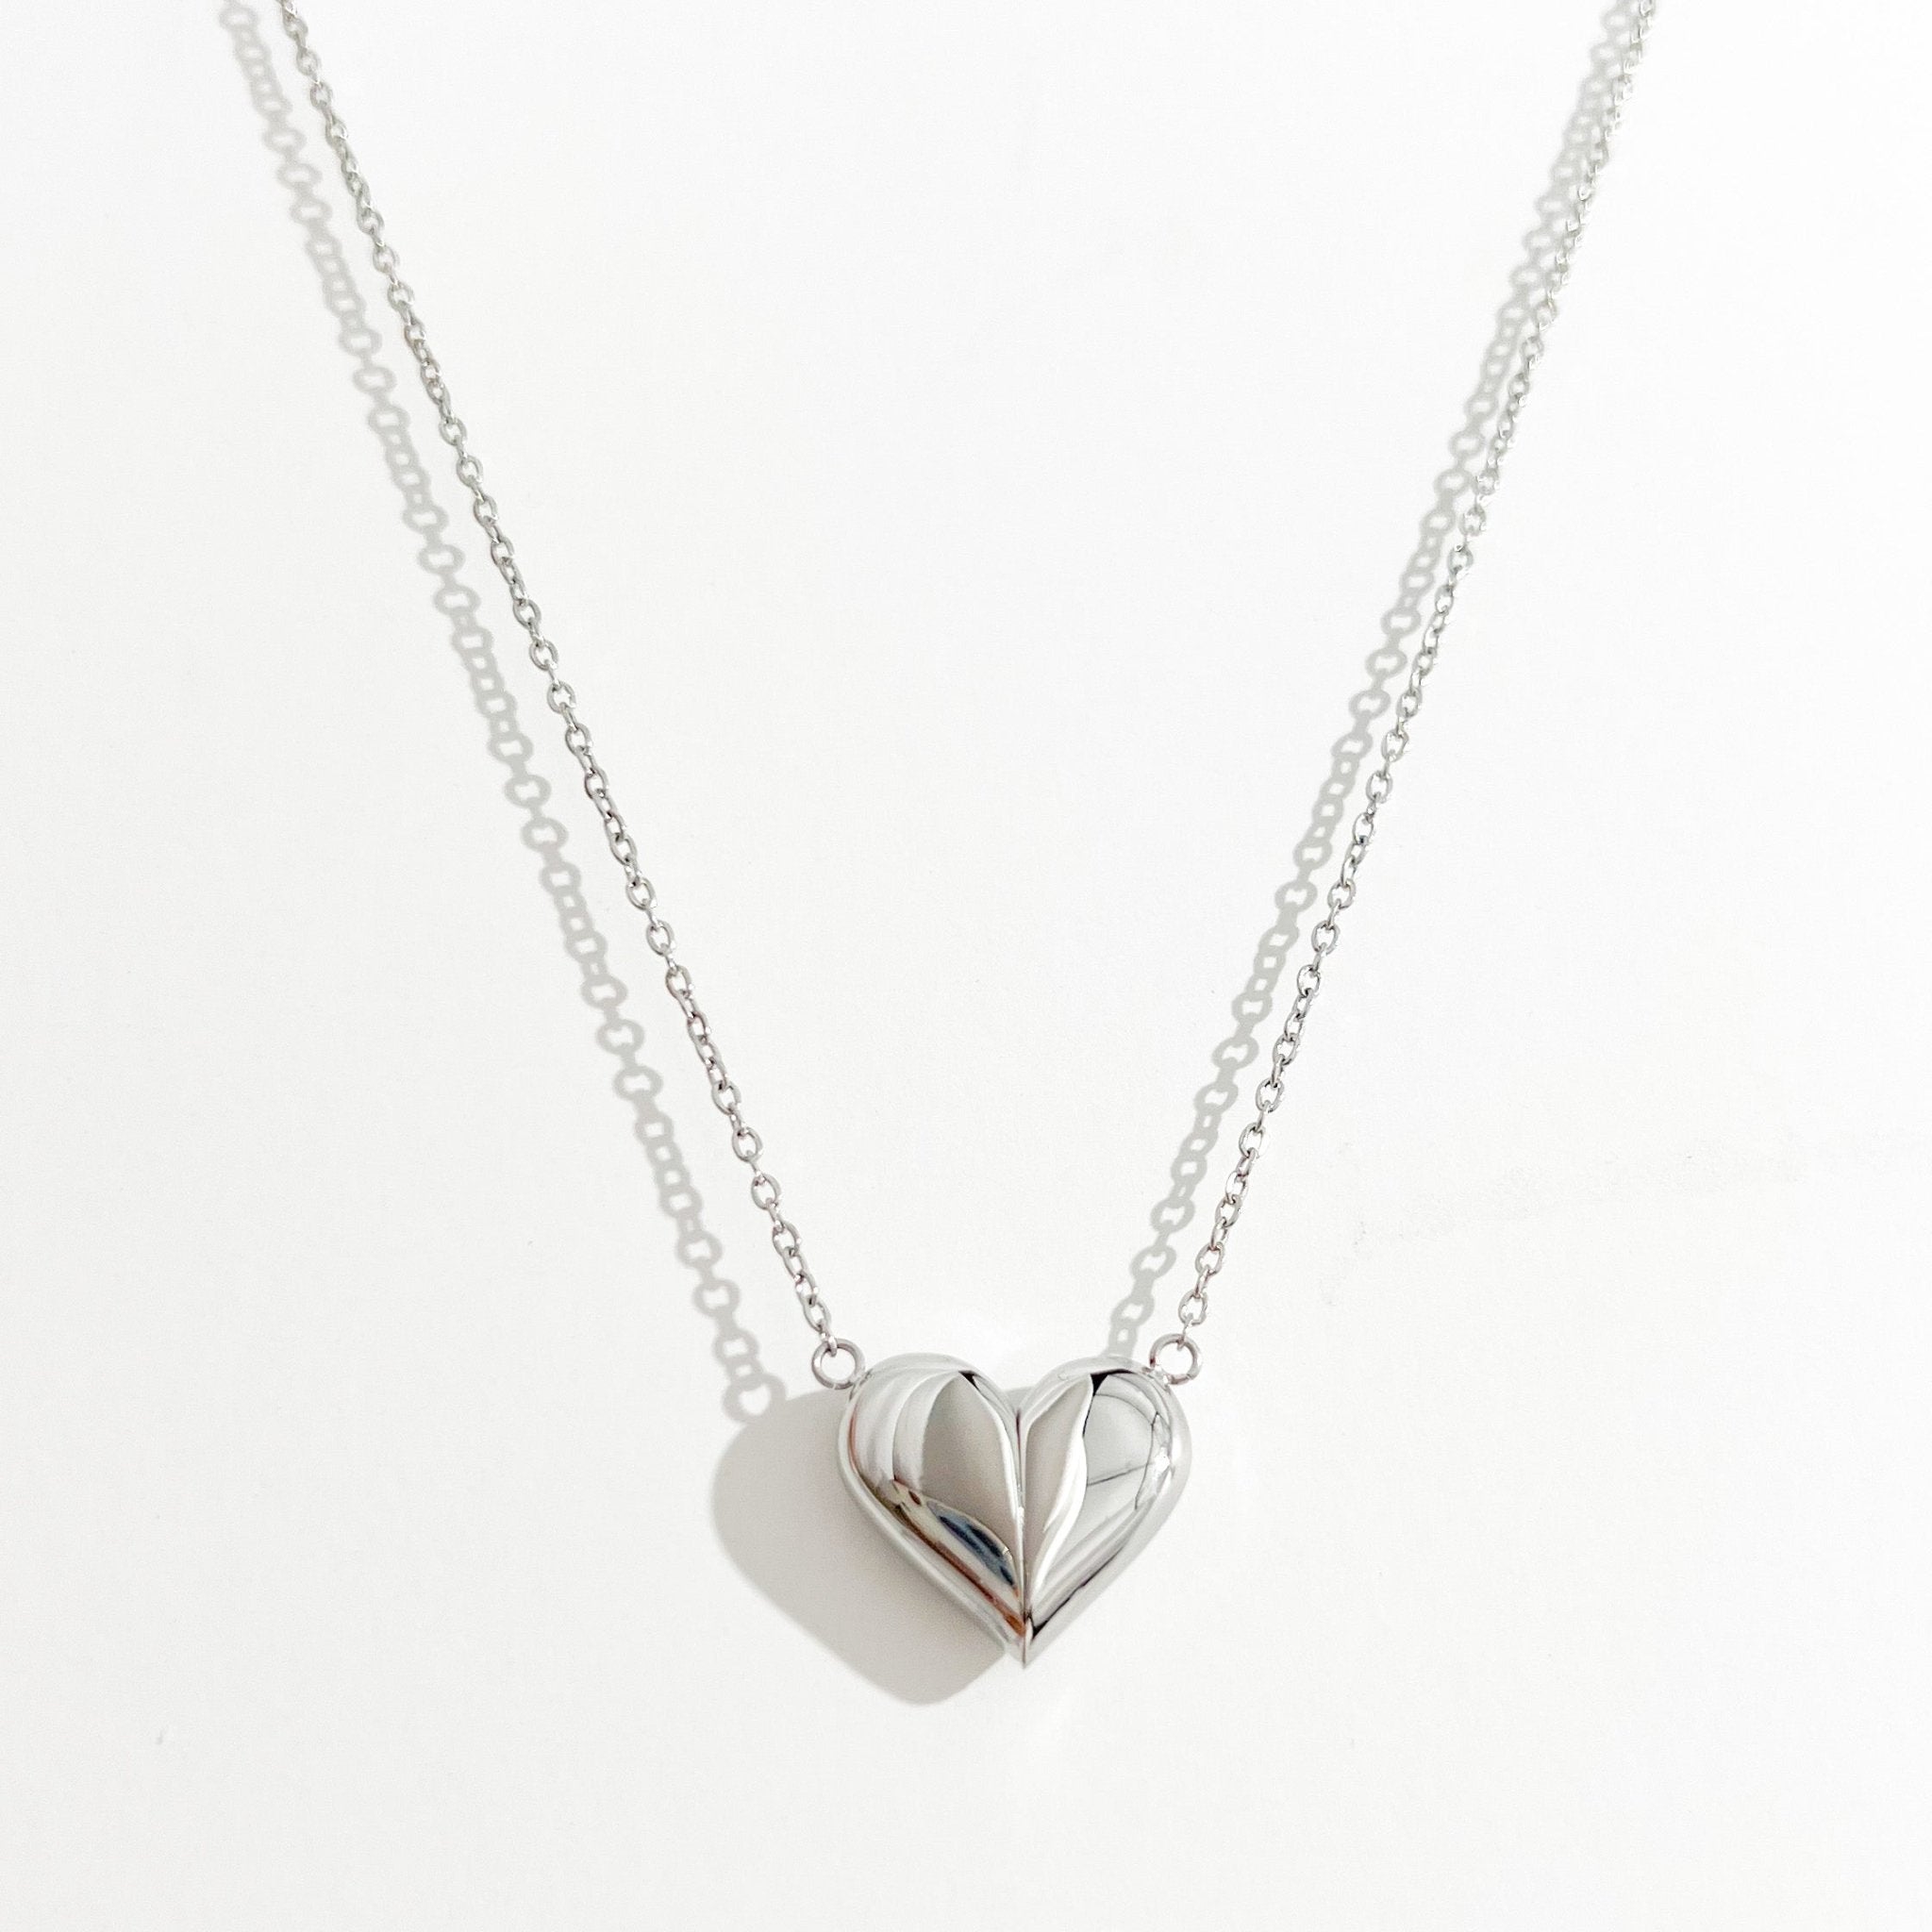 Magnetic Heart Necklace in Silver - Flaire & Co.